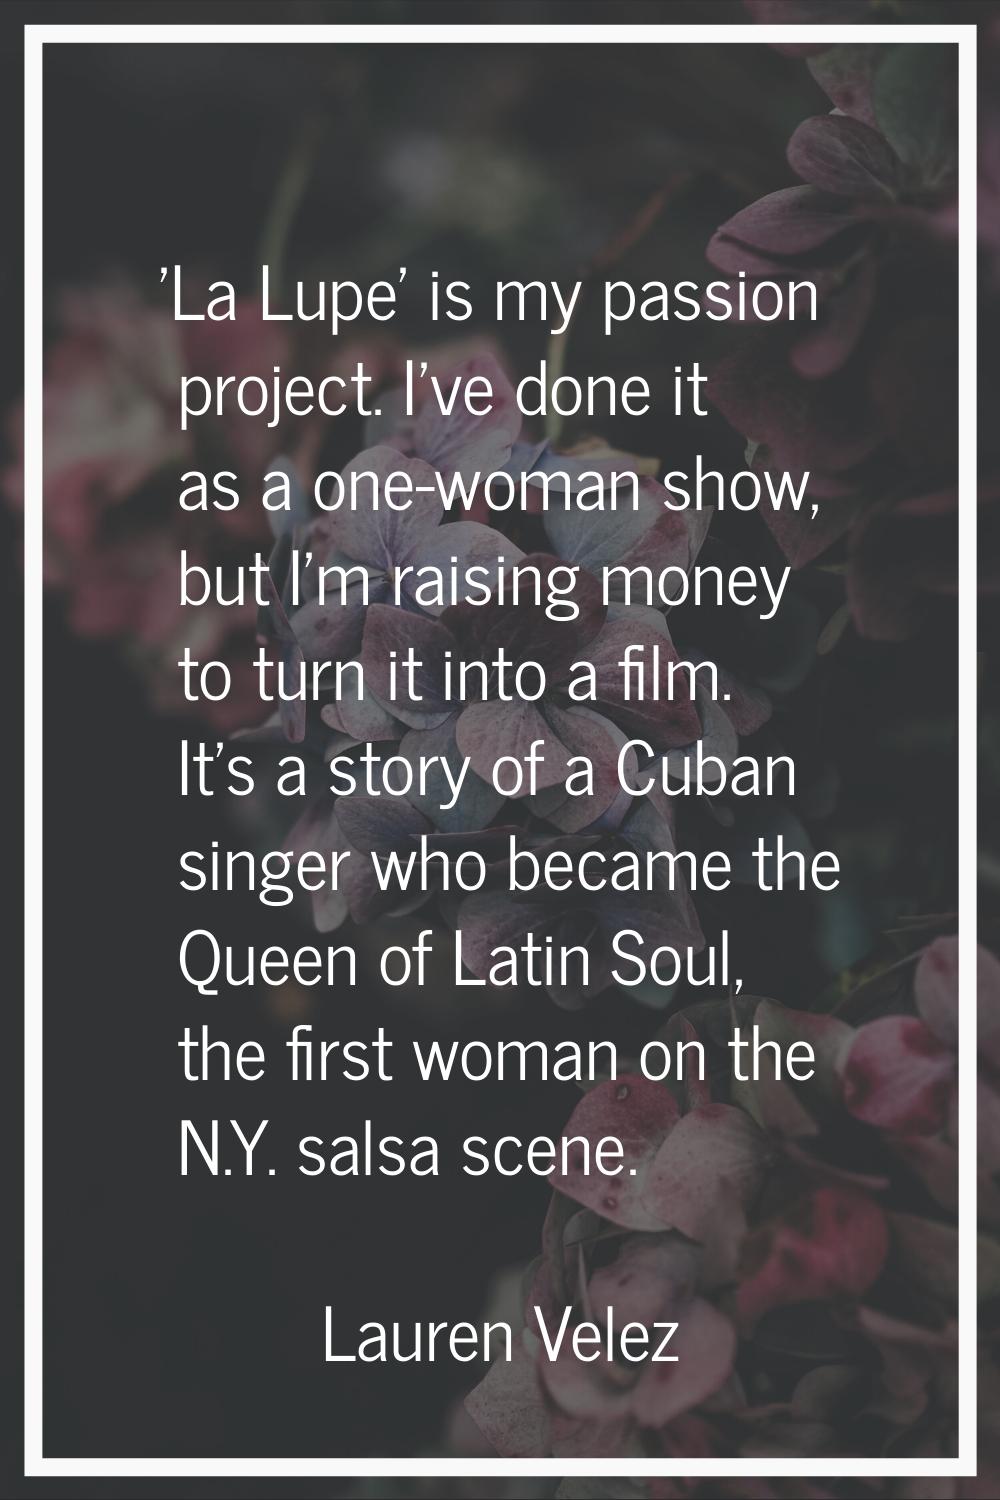 'La Lupe' is my passion project. I've done it as a one-woman show, but I'm raising money to turn it